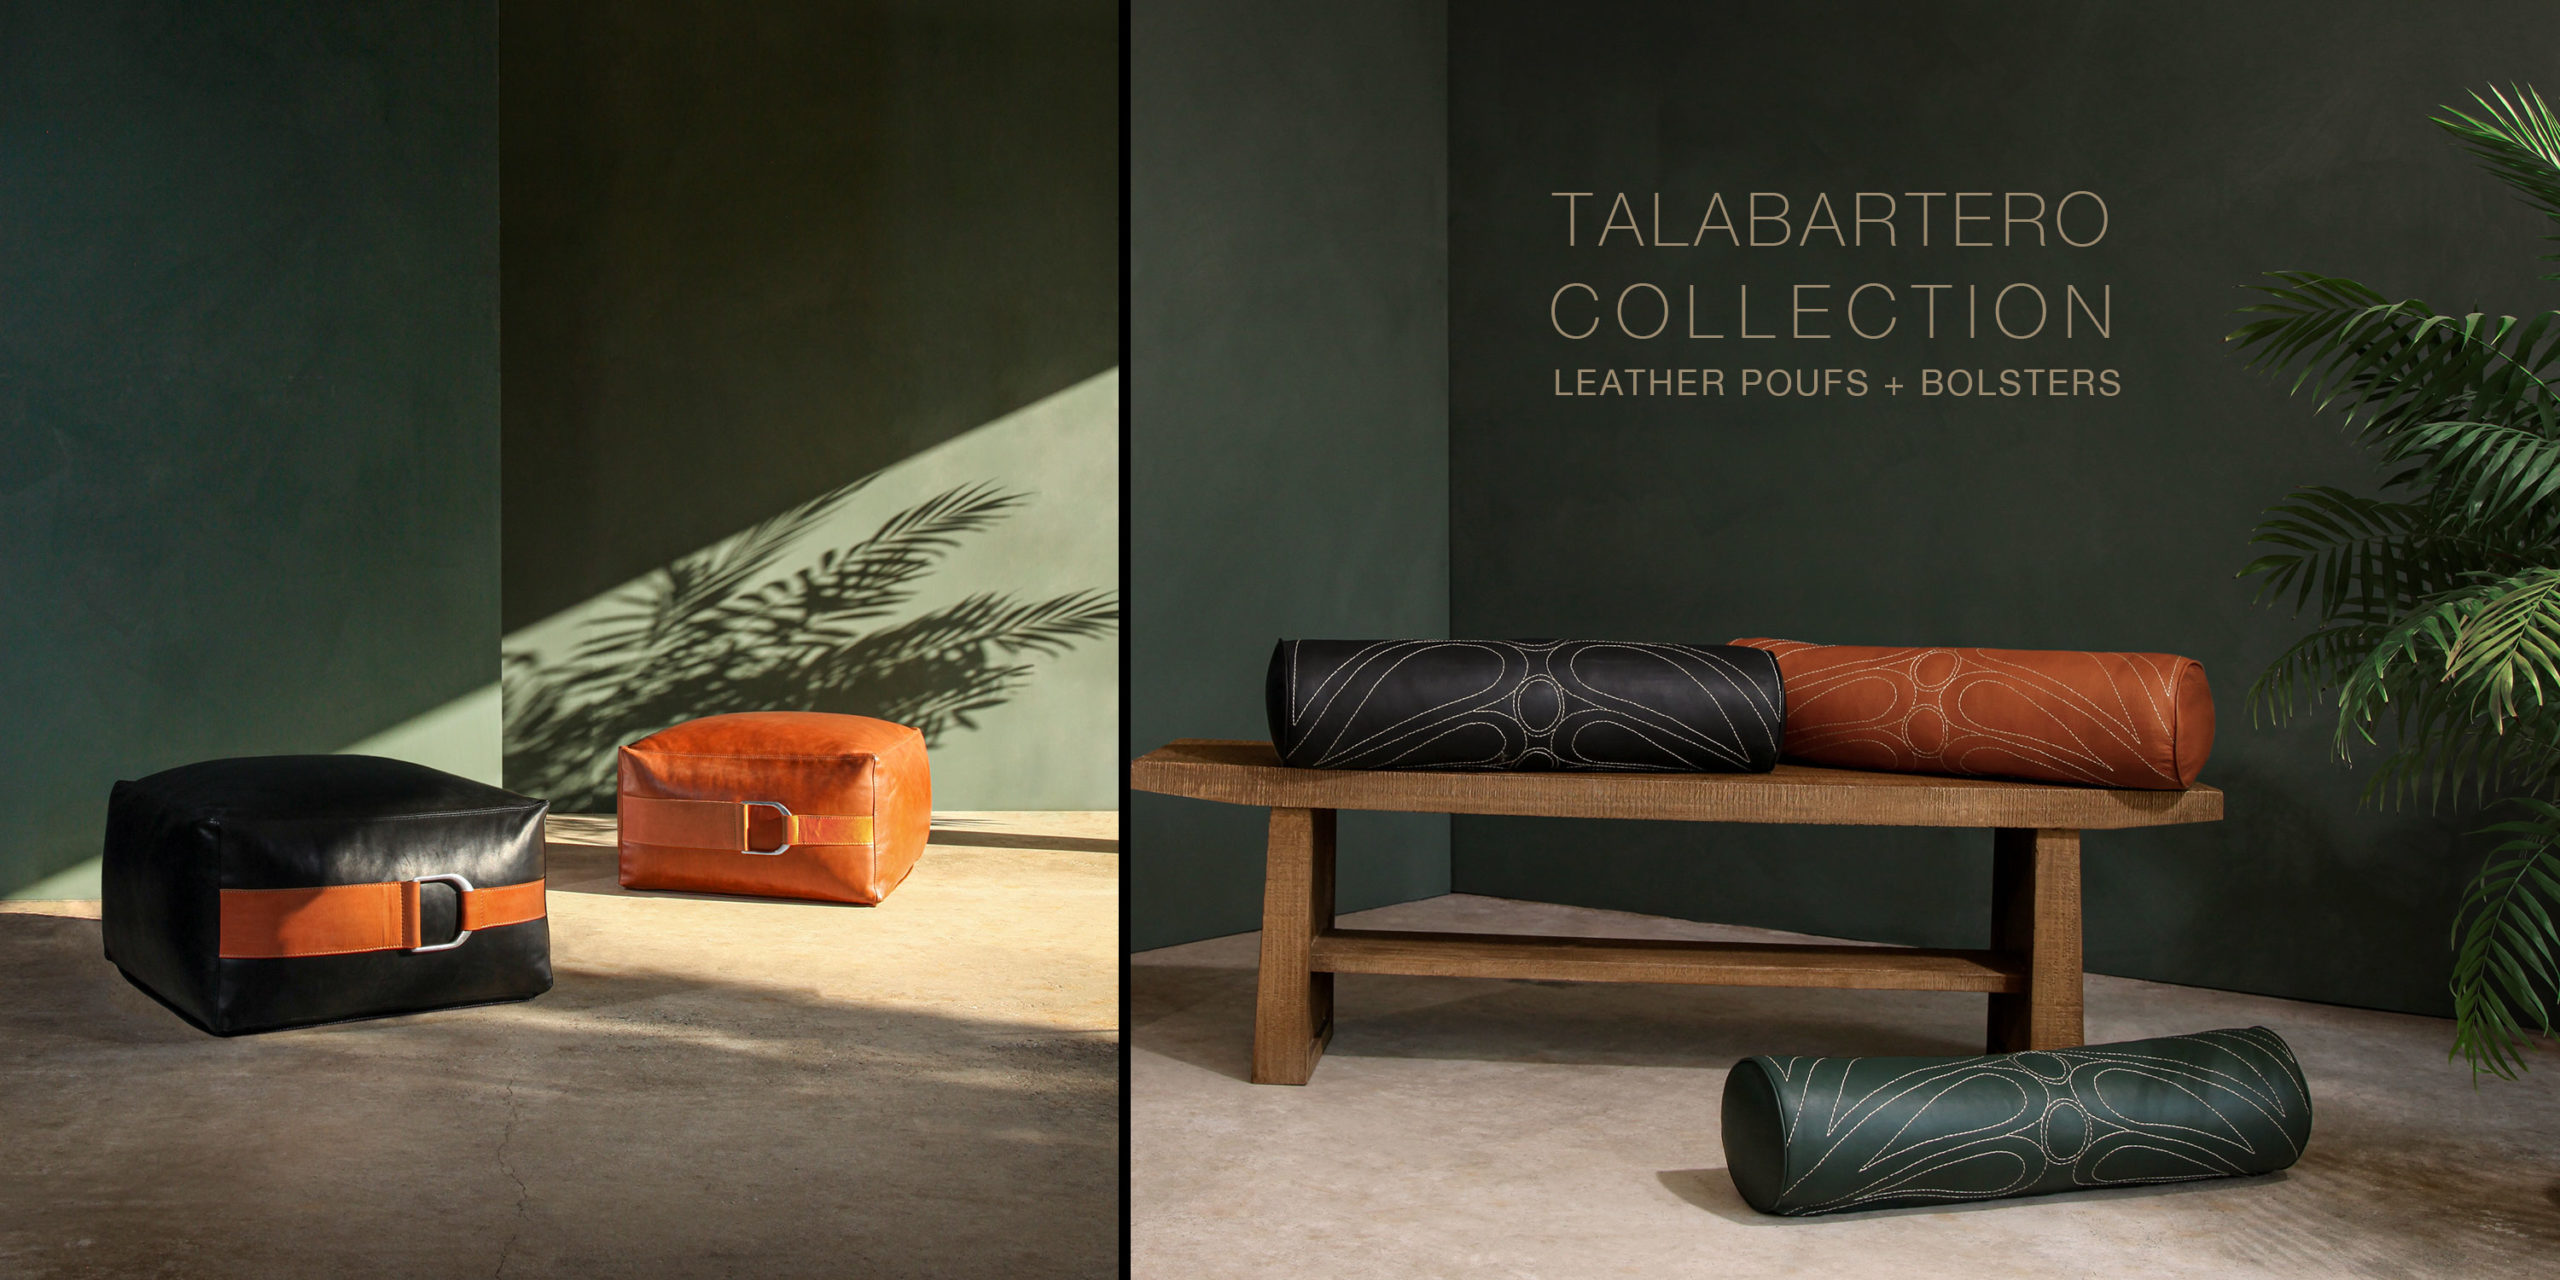 Talabartero leather collection, jewel-toned leather poufs and bolster pillows